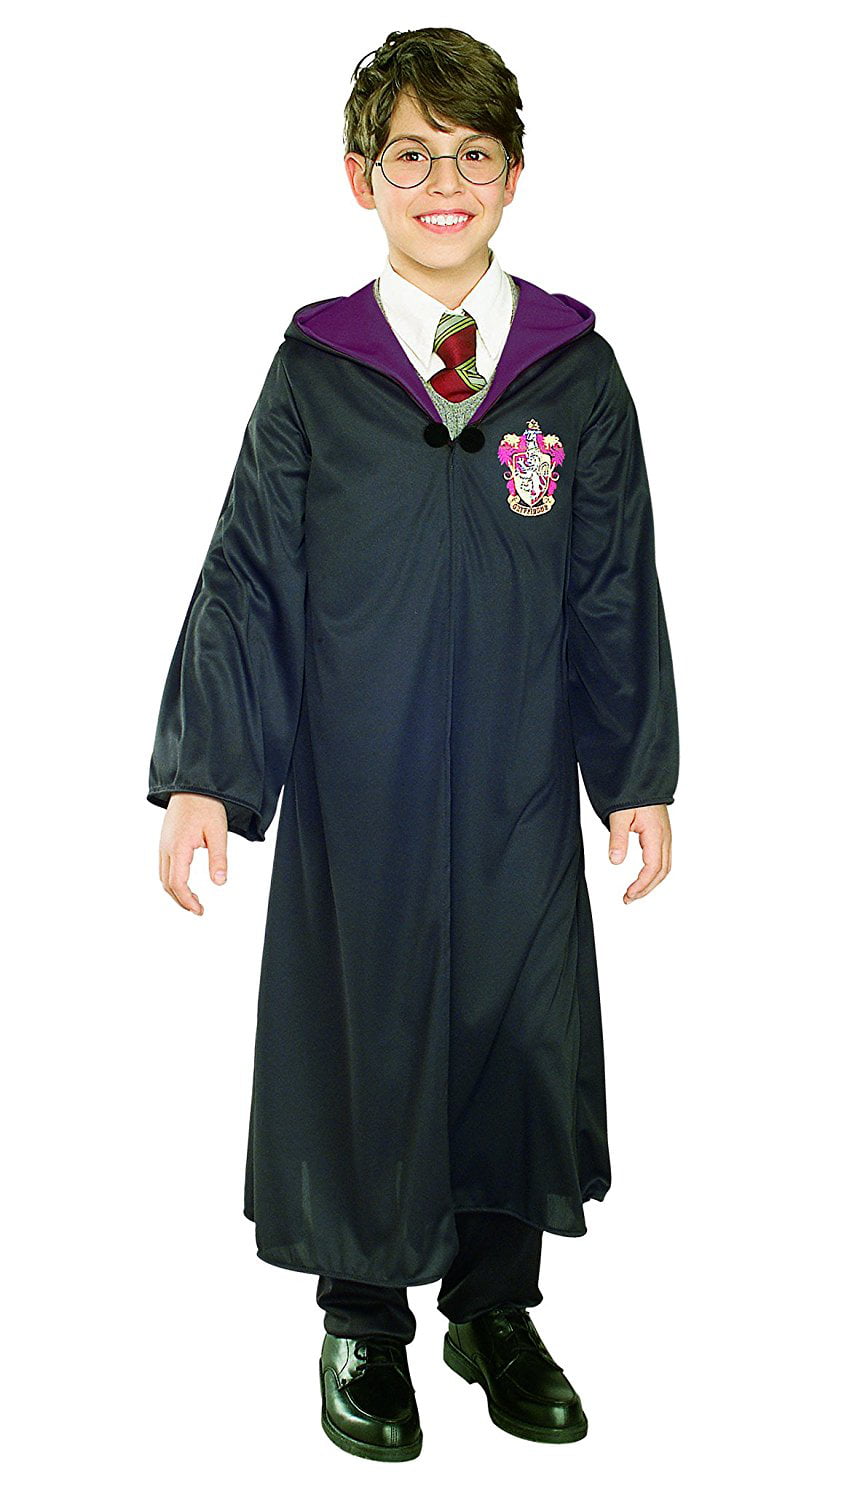 Details about   Rubies Harry Potter Childs Costume Robe Large 